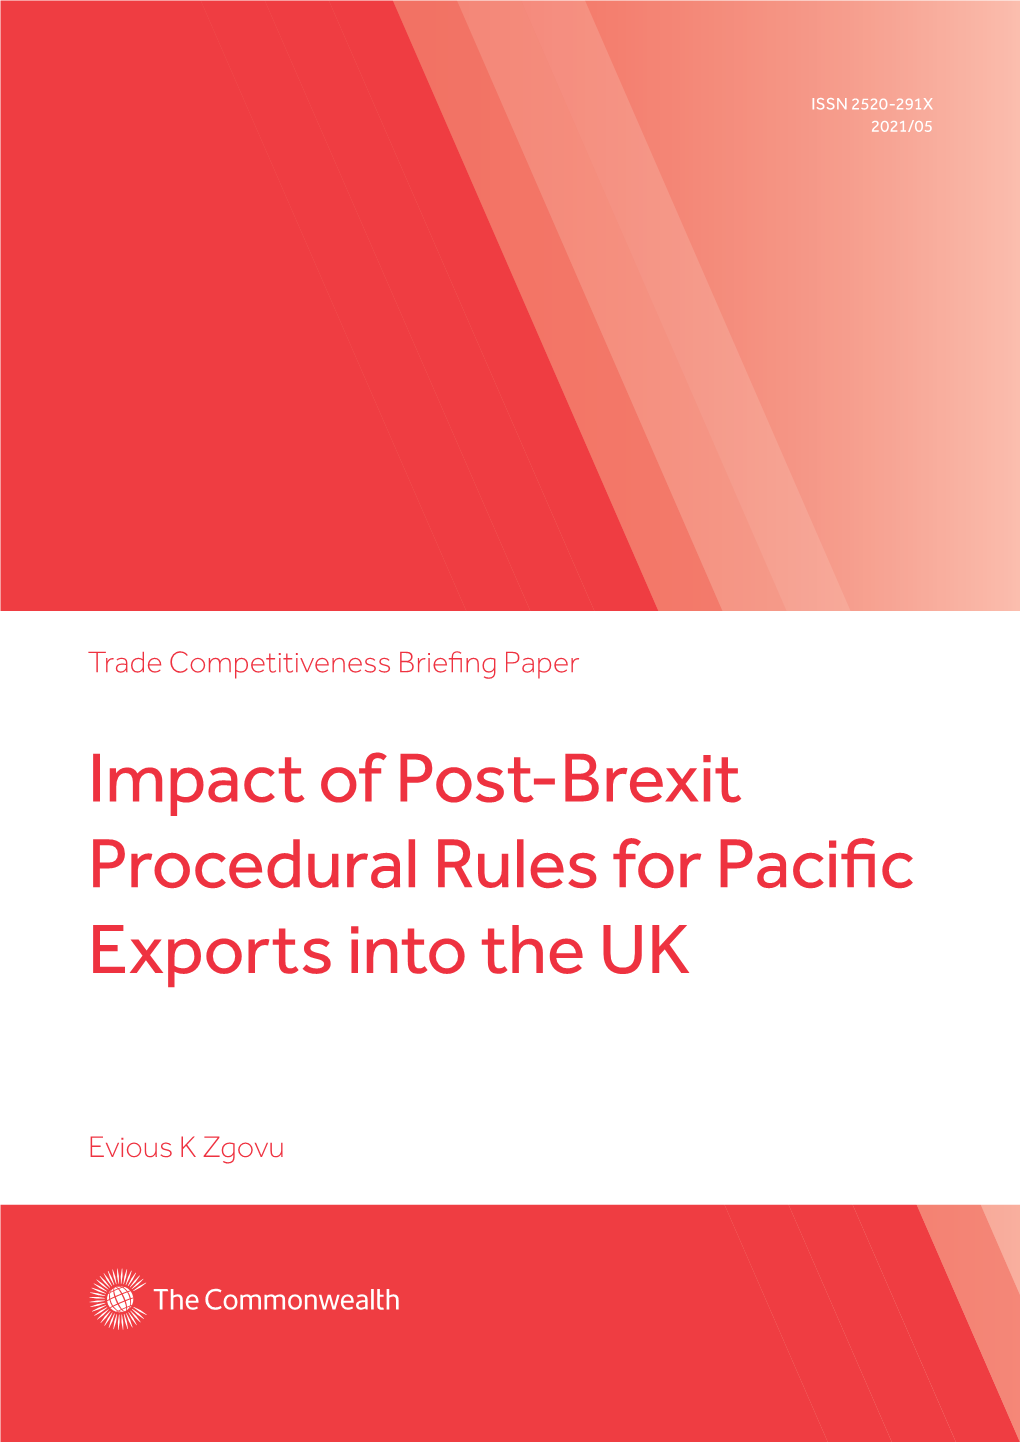 Impact of Post-Brexit Procedural Rules for Pacific Exports Into the UK